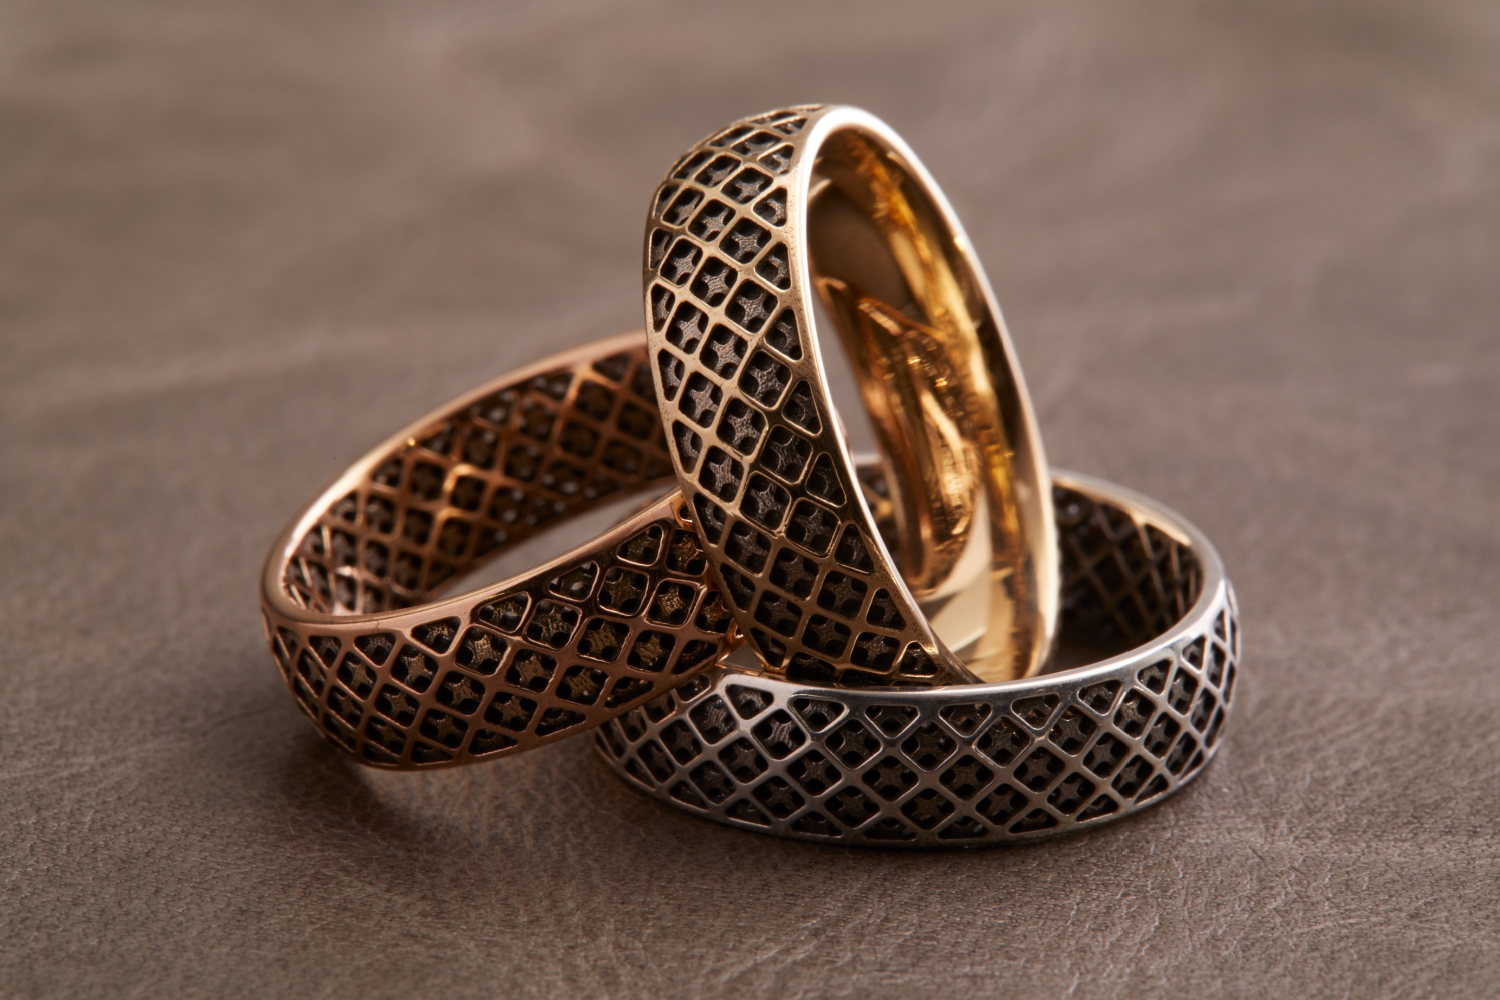 Three stacked gold rings featuring an interior and exterior square-based grid pattern.